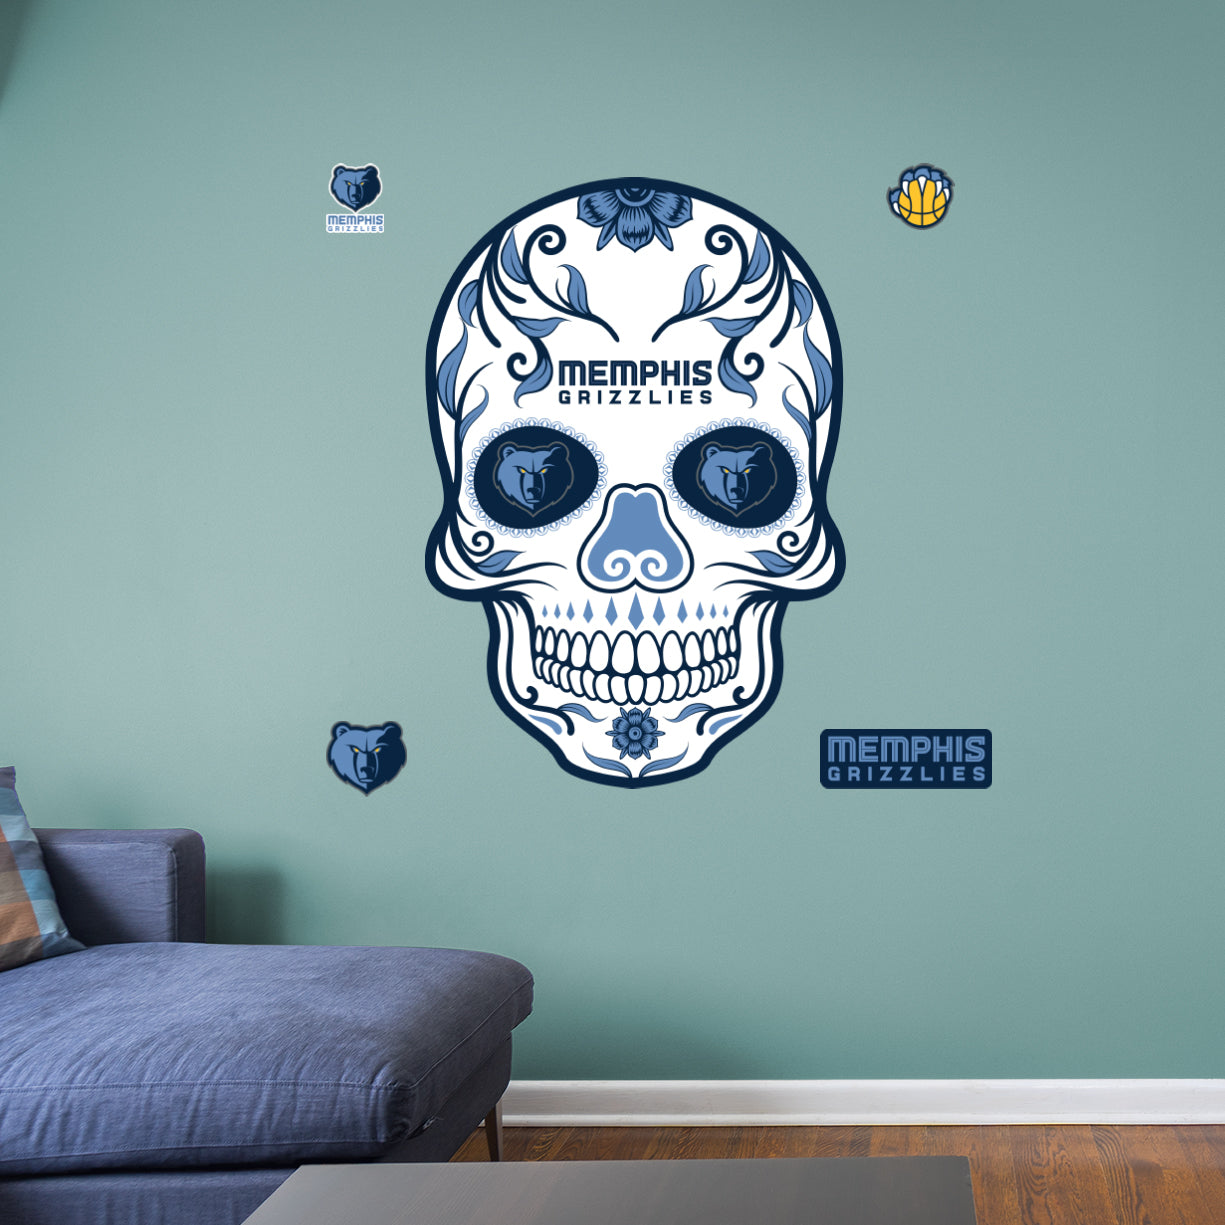 Memphis Grizzlies: Skull - Officially Licensed NBA Removable Adhesive Decal